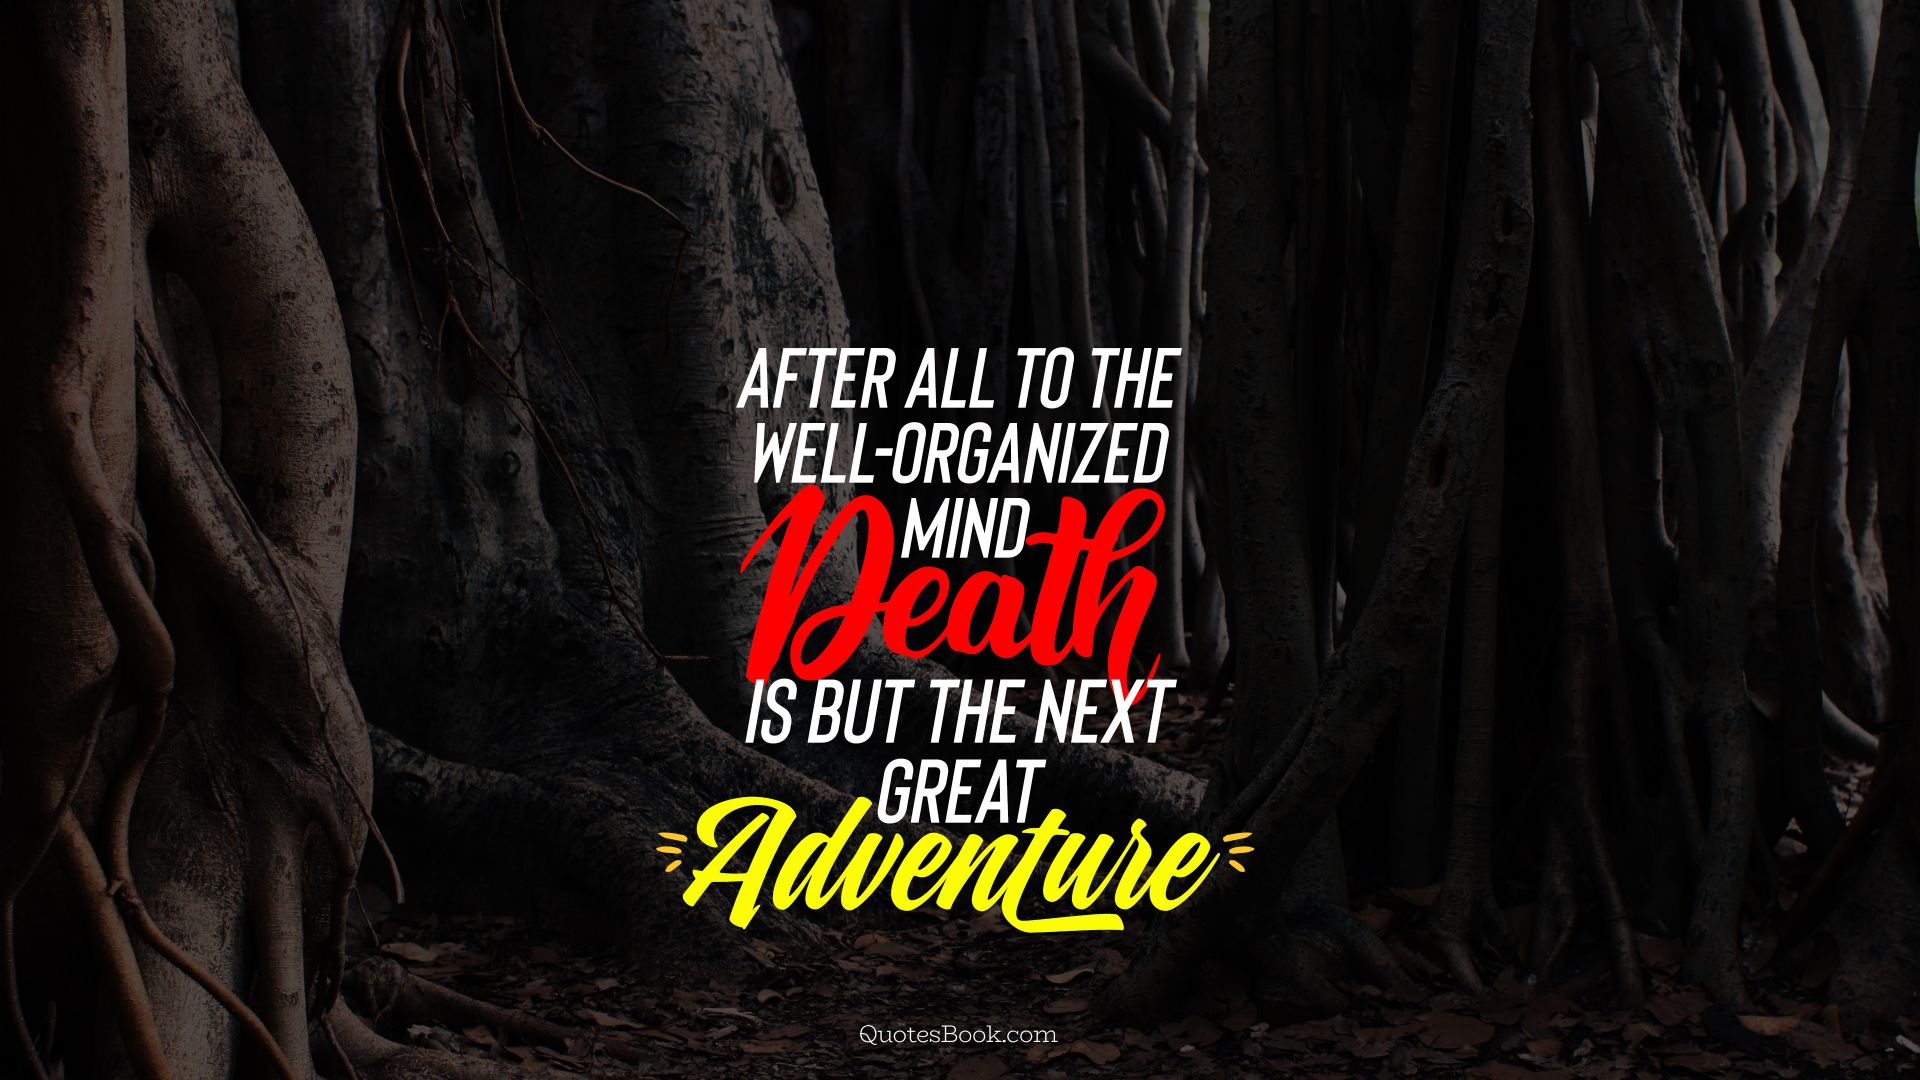 After all, to the well-organized mind,
death is but the next great adventure